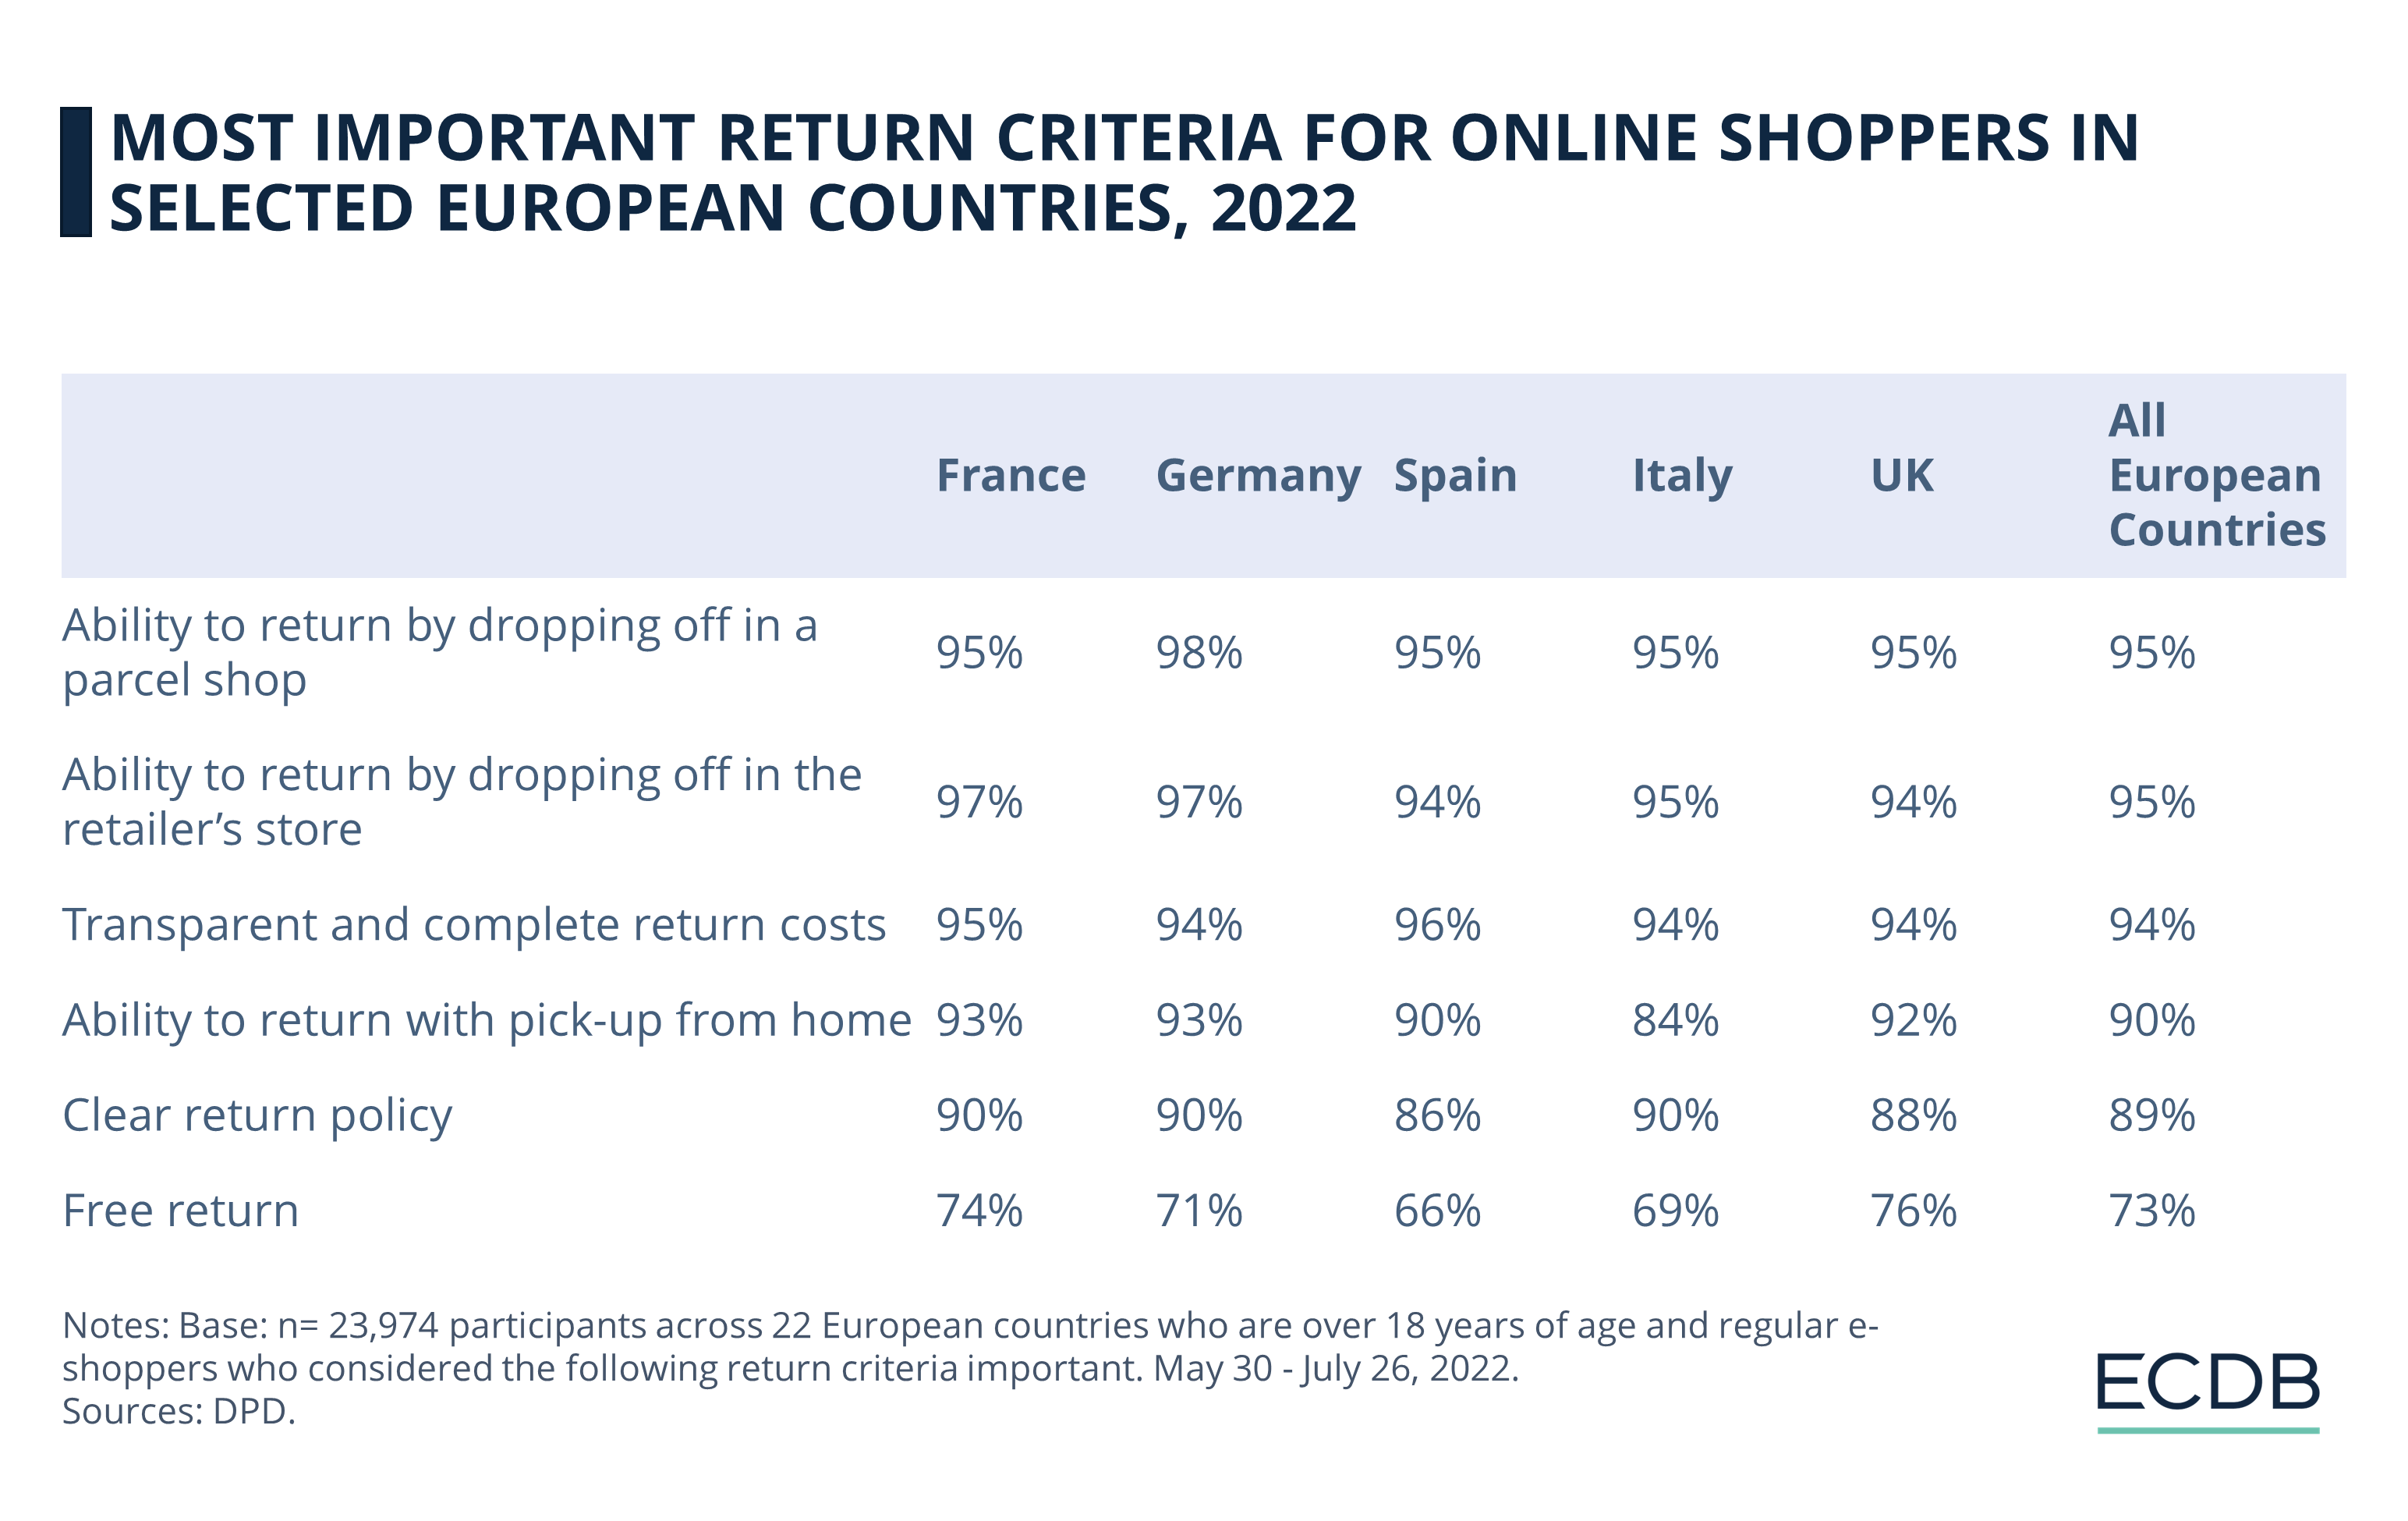 Most Important Return Criteria for Online Shoppers in Selected European Countries, 2022